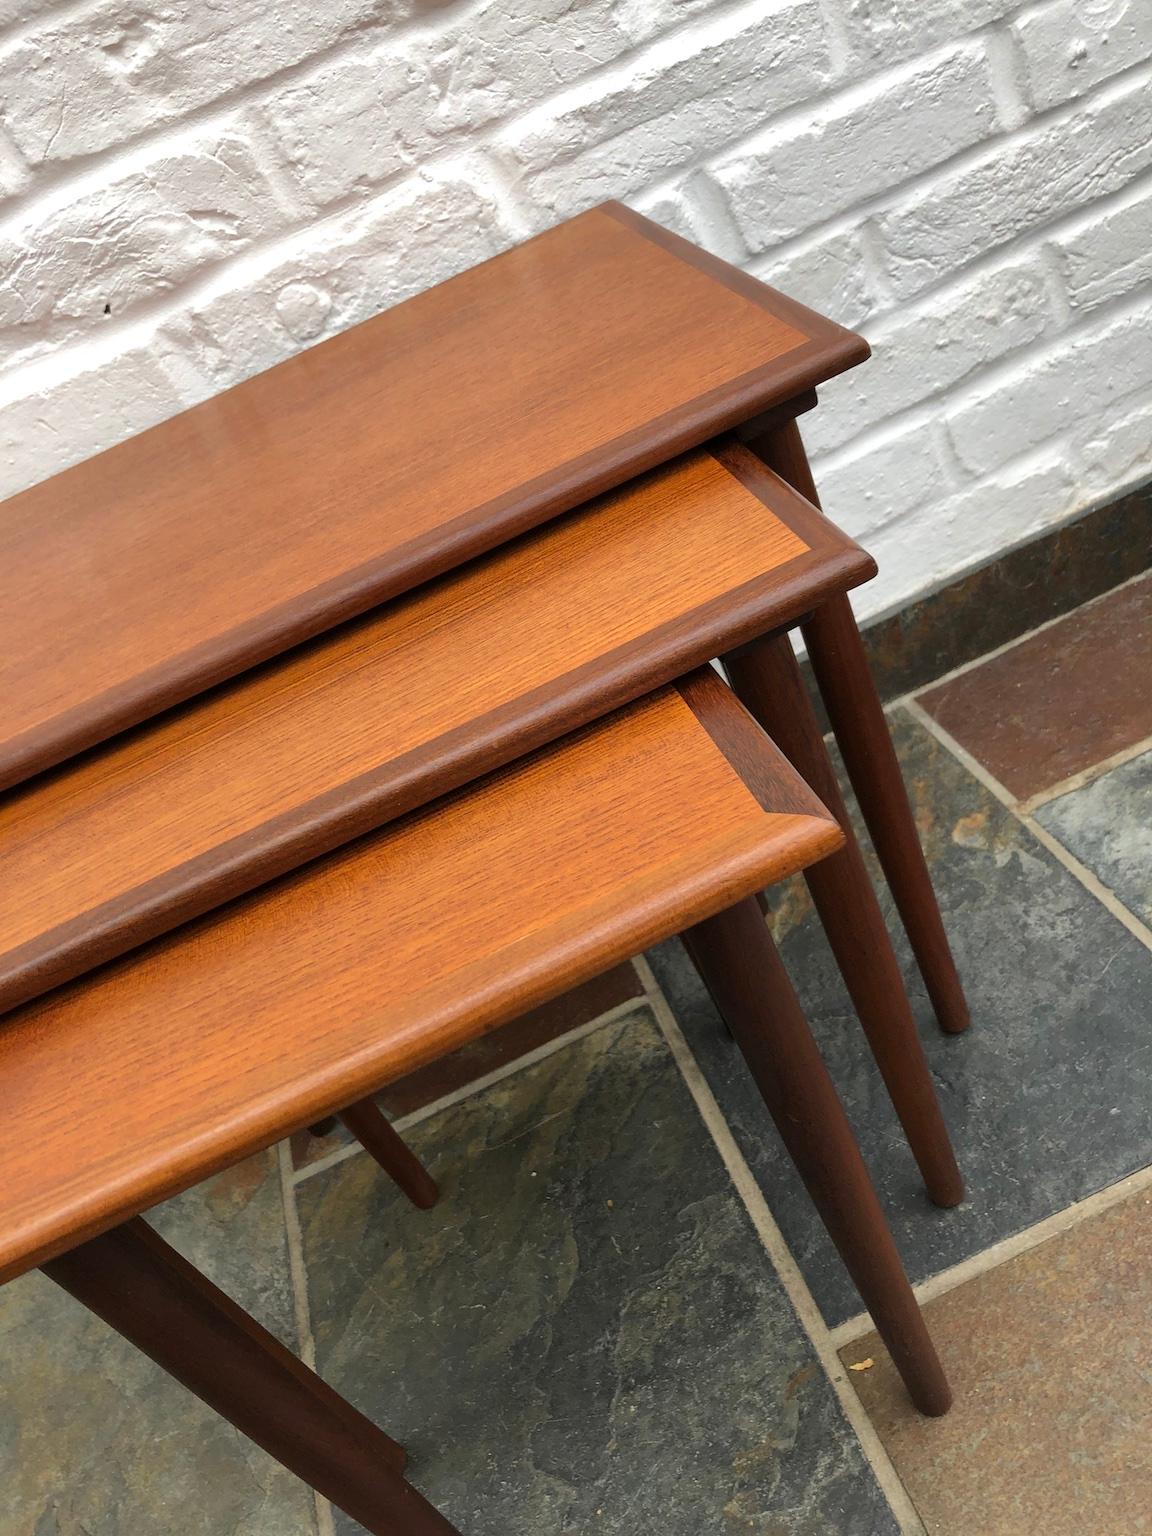 Danish midcentury teak nesting tables by Poul Hundevad, circa 1960s.
A nest of three teak nesting tables designed by Poul Hundevad and
manufactured by Fabian in Denmark.
Beautiful tapered legs the small and medium table slide into each